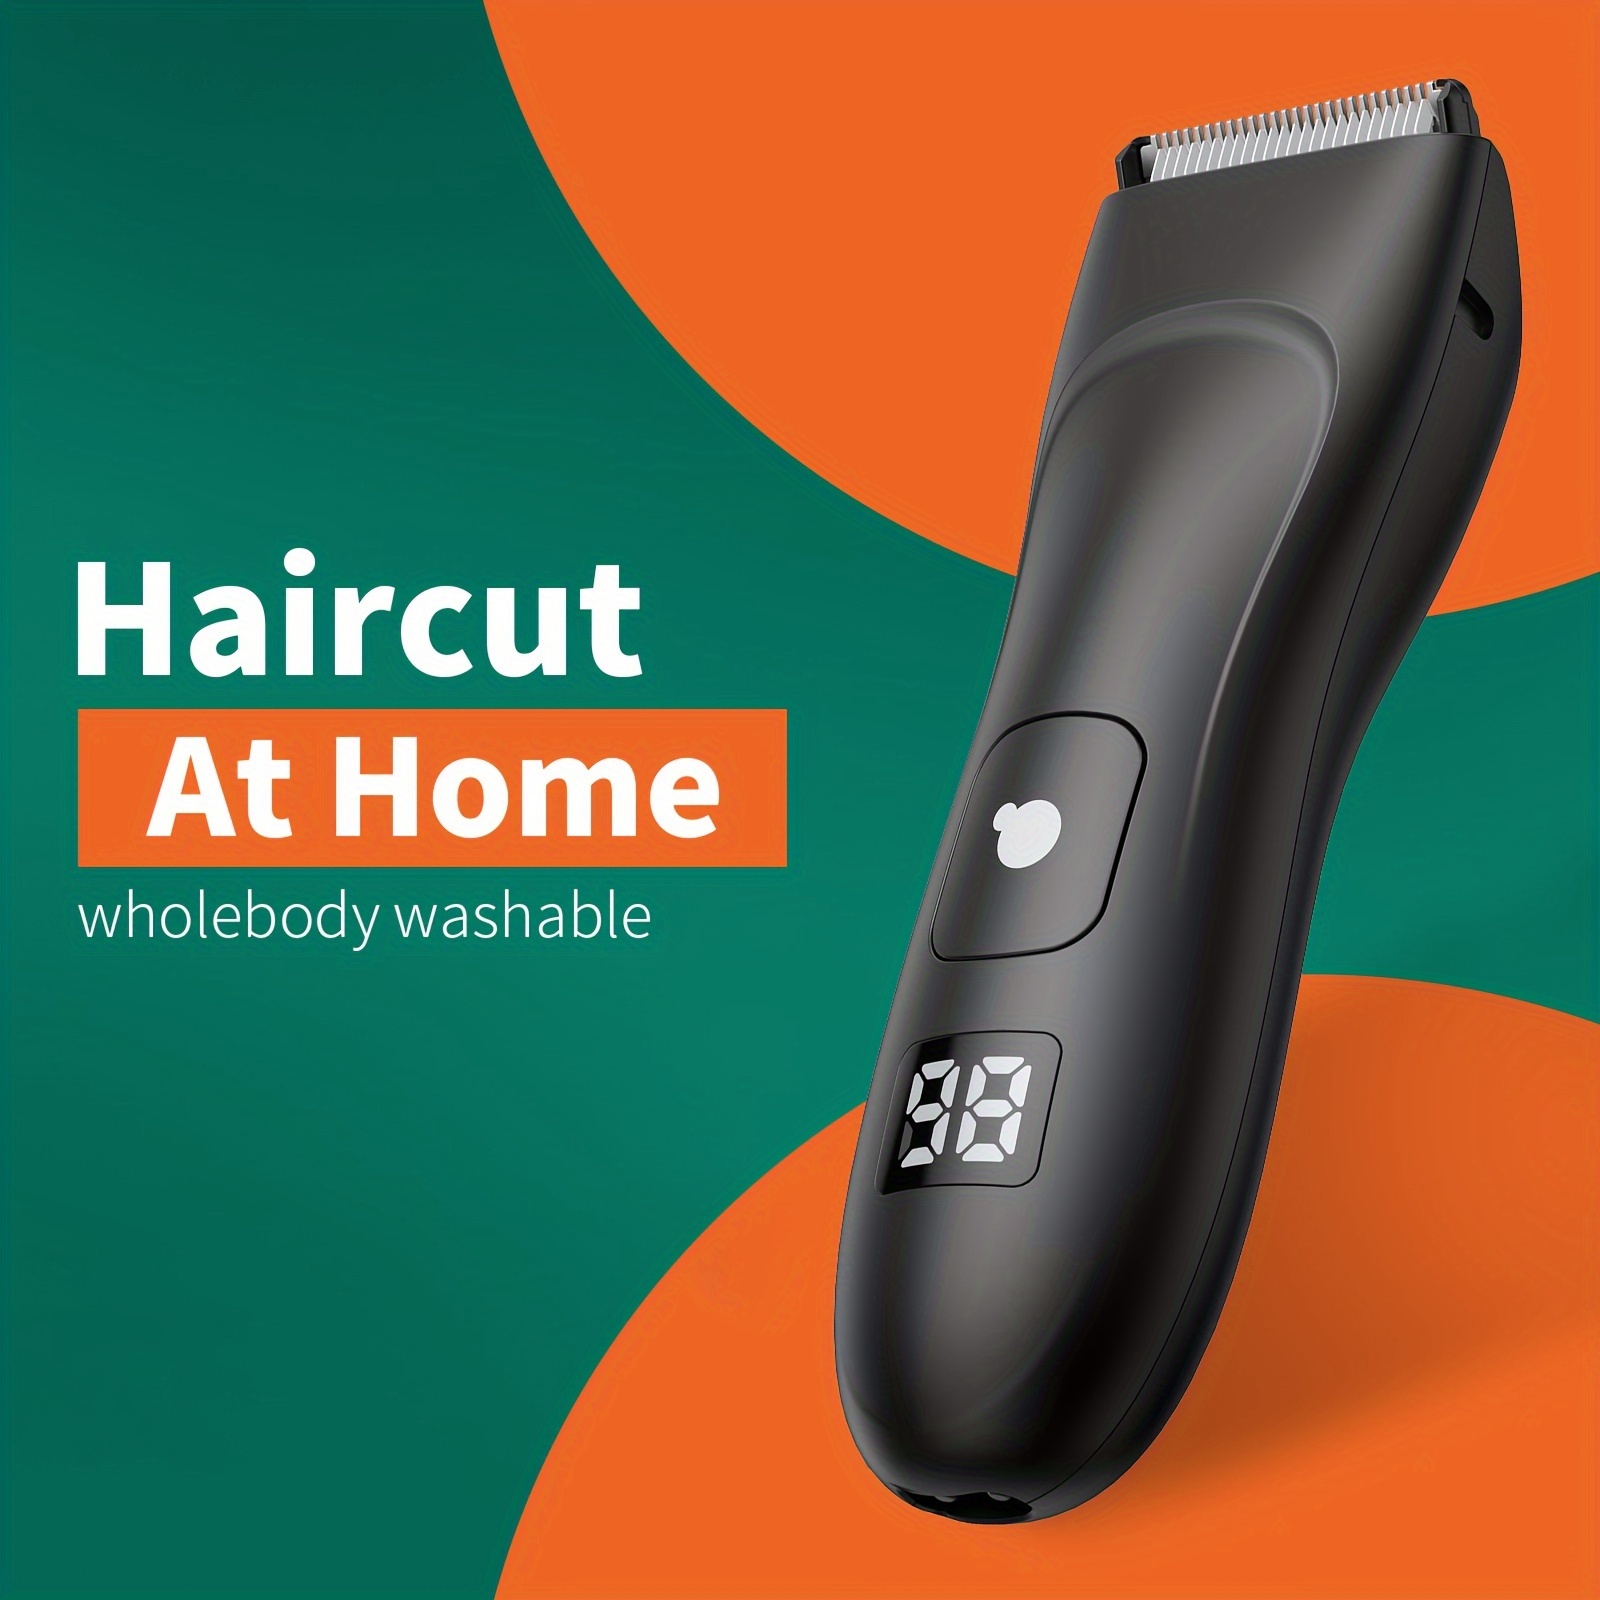 

Professional Electric Hair Trimmer, Pubic Hair Trimmer For Men, Hair Care And Styling Machine